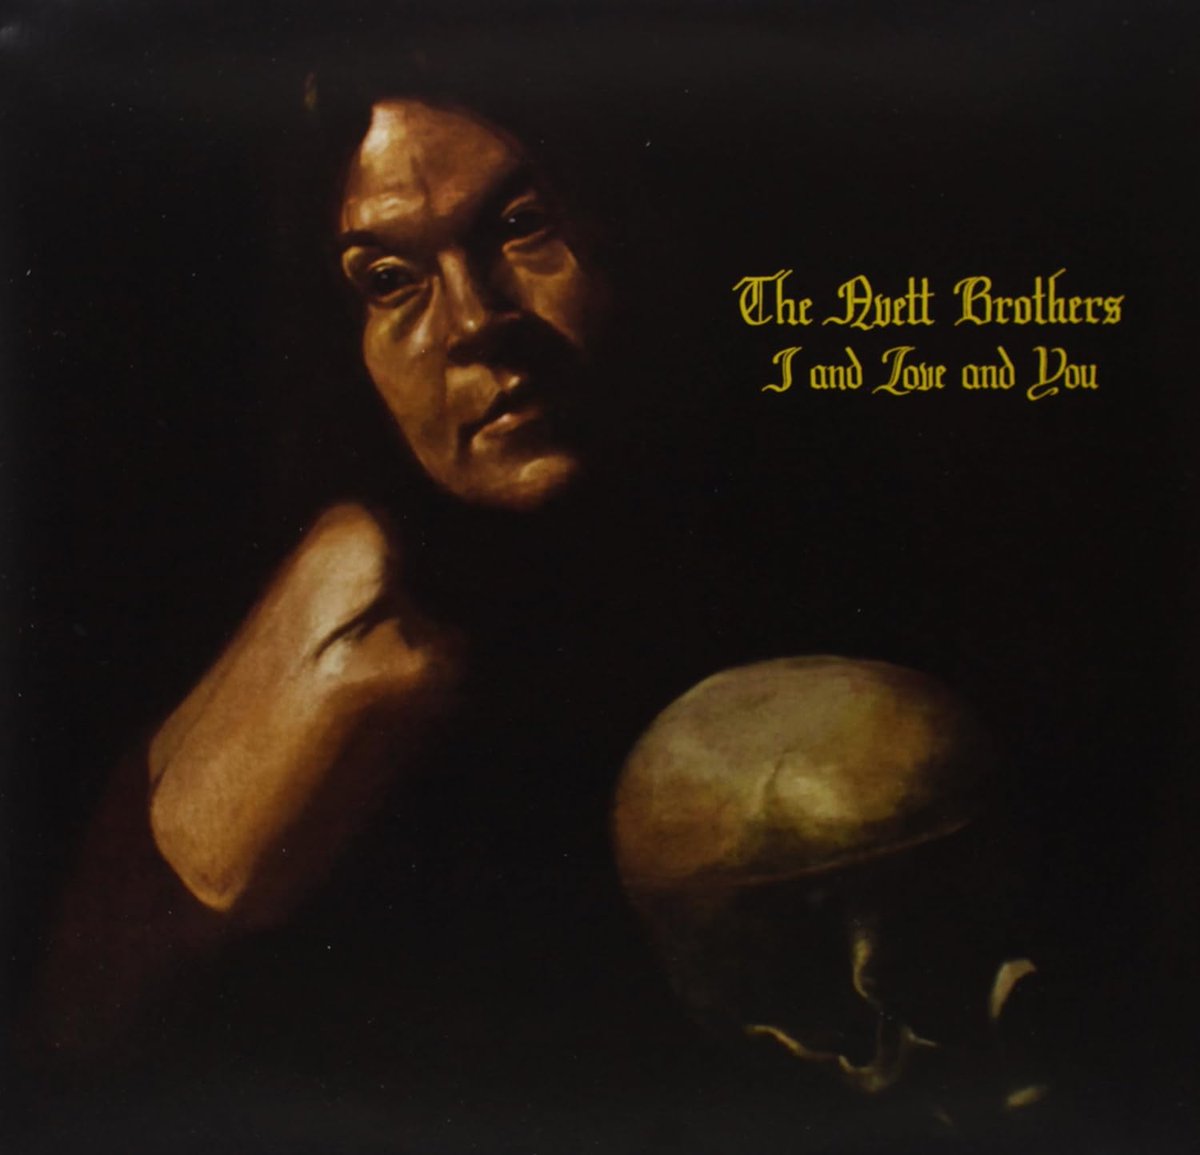 #TheAvettBrothers - I And Love And You $26.59 (Save $11.40 at checkout) amzn.to/3yEpM6R